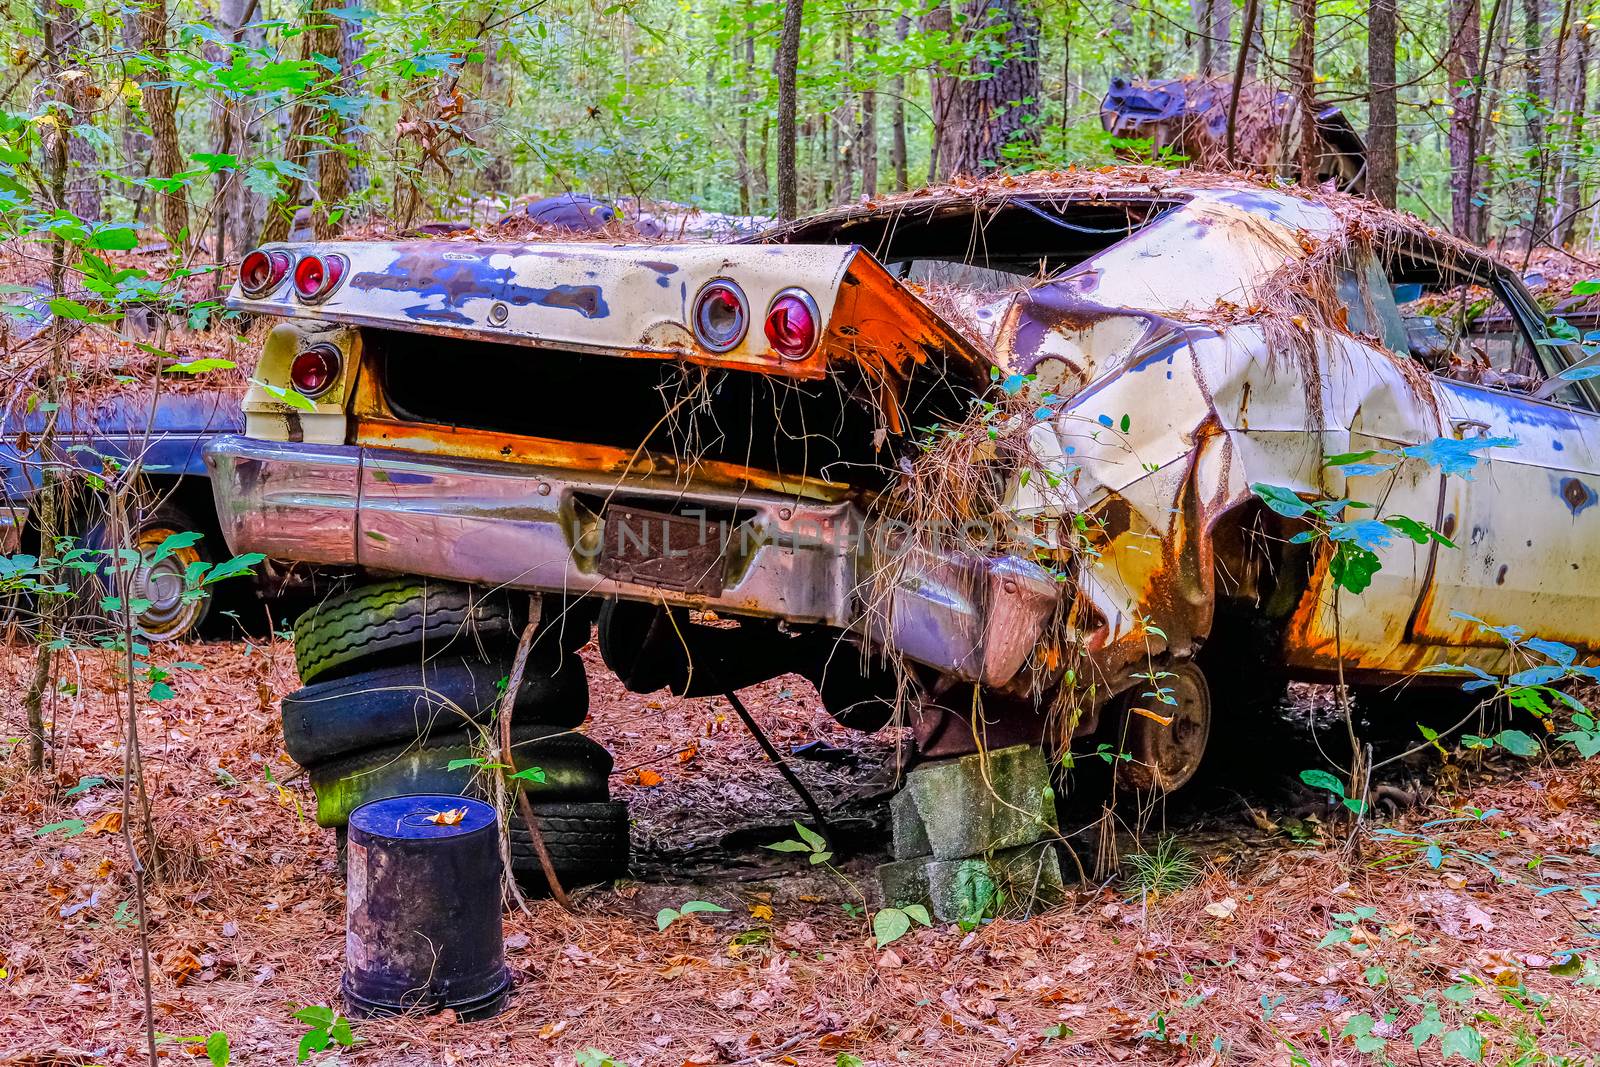 Trunk of Old Wrecked Car Propped up on Tires and Cinder Blocks